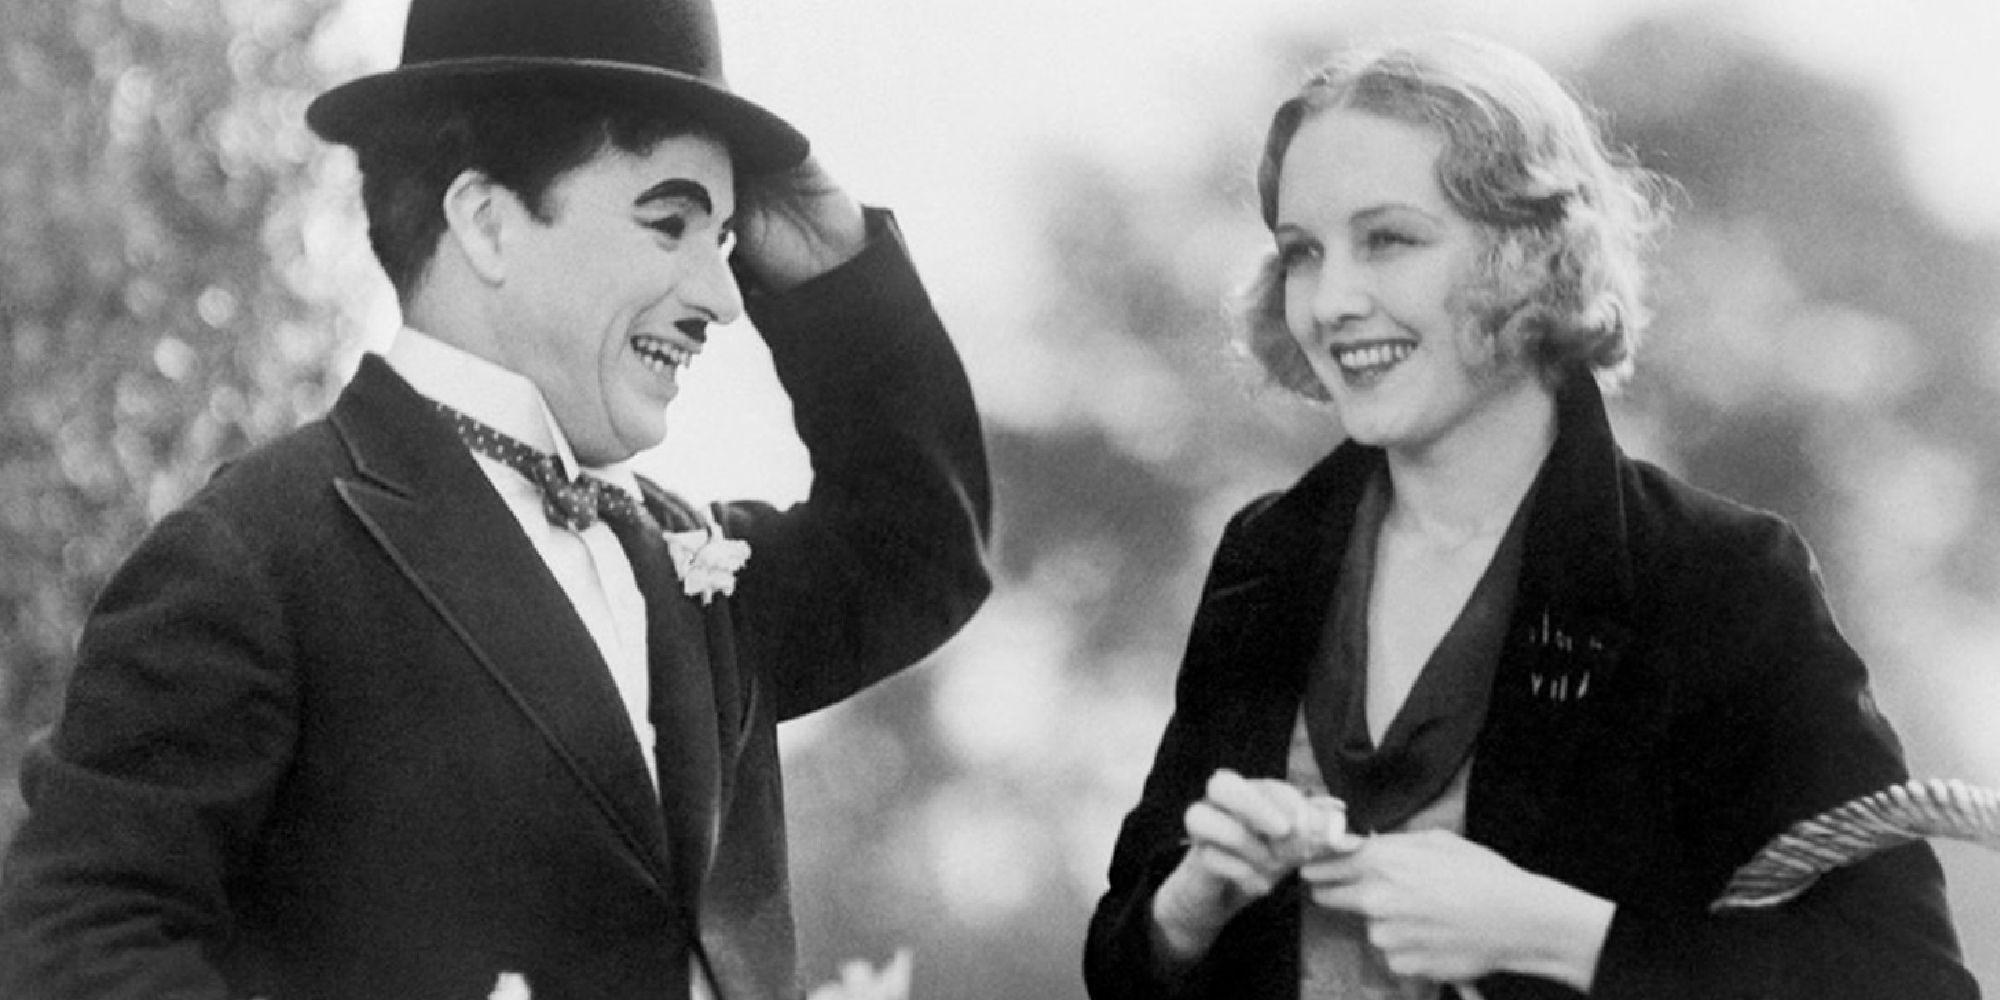 Charlie Chaplin and Virginia Cherrill smiling while standing next to each other in City Lights.